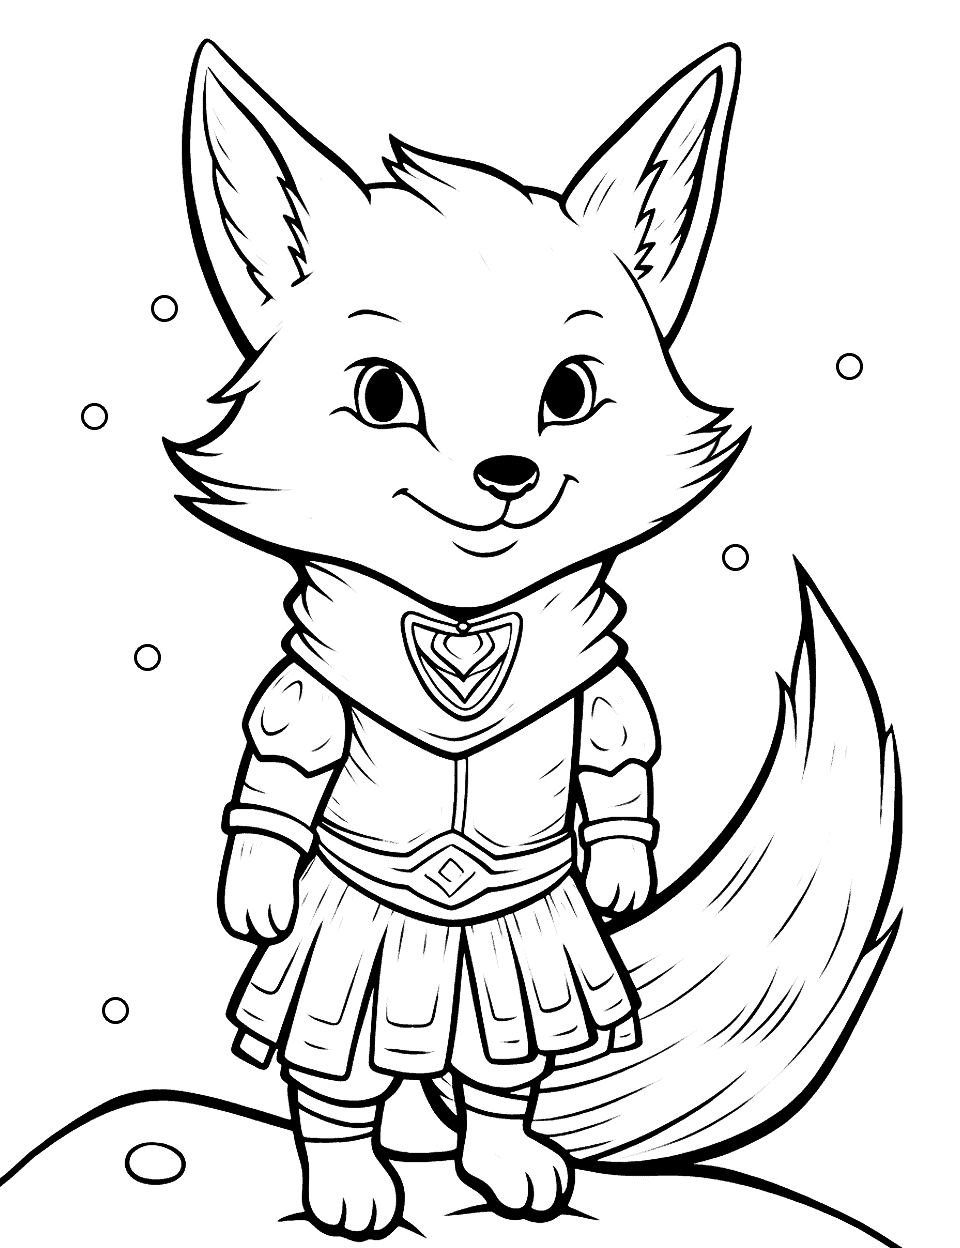 Knight Fox Coloring Page - A brave fox donned in knight armor, ready to defend its kingdom.